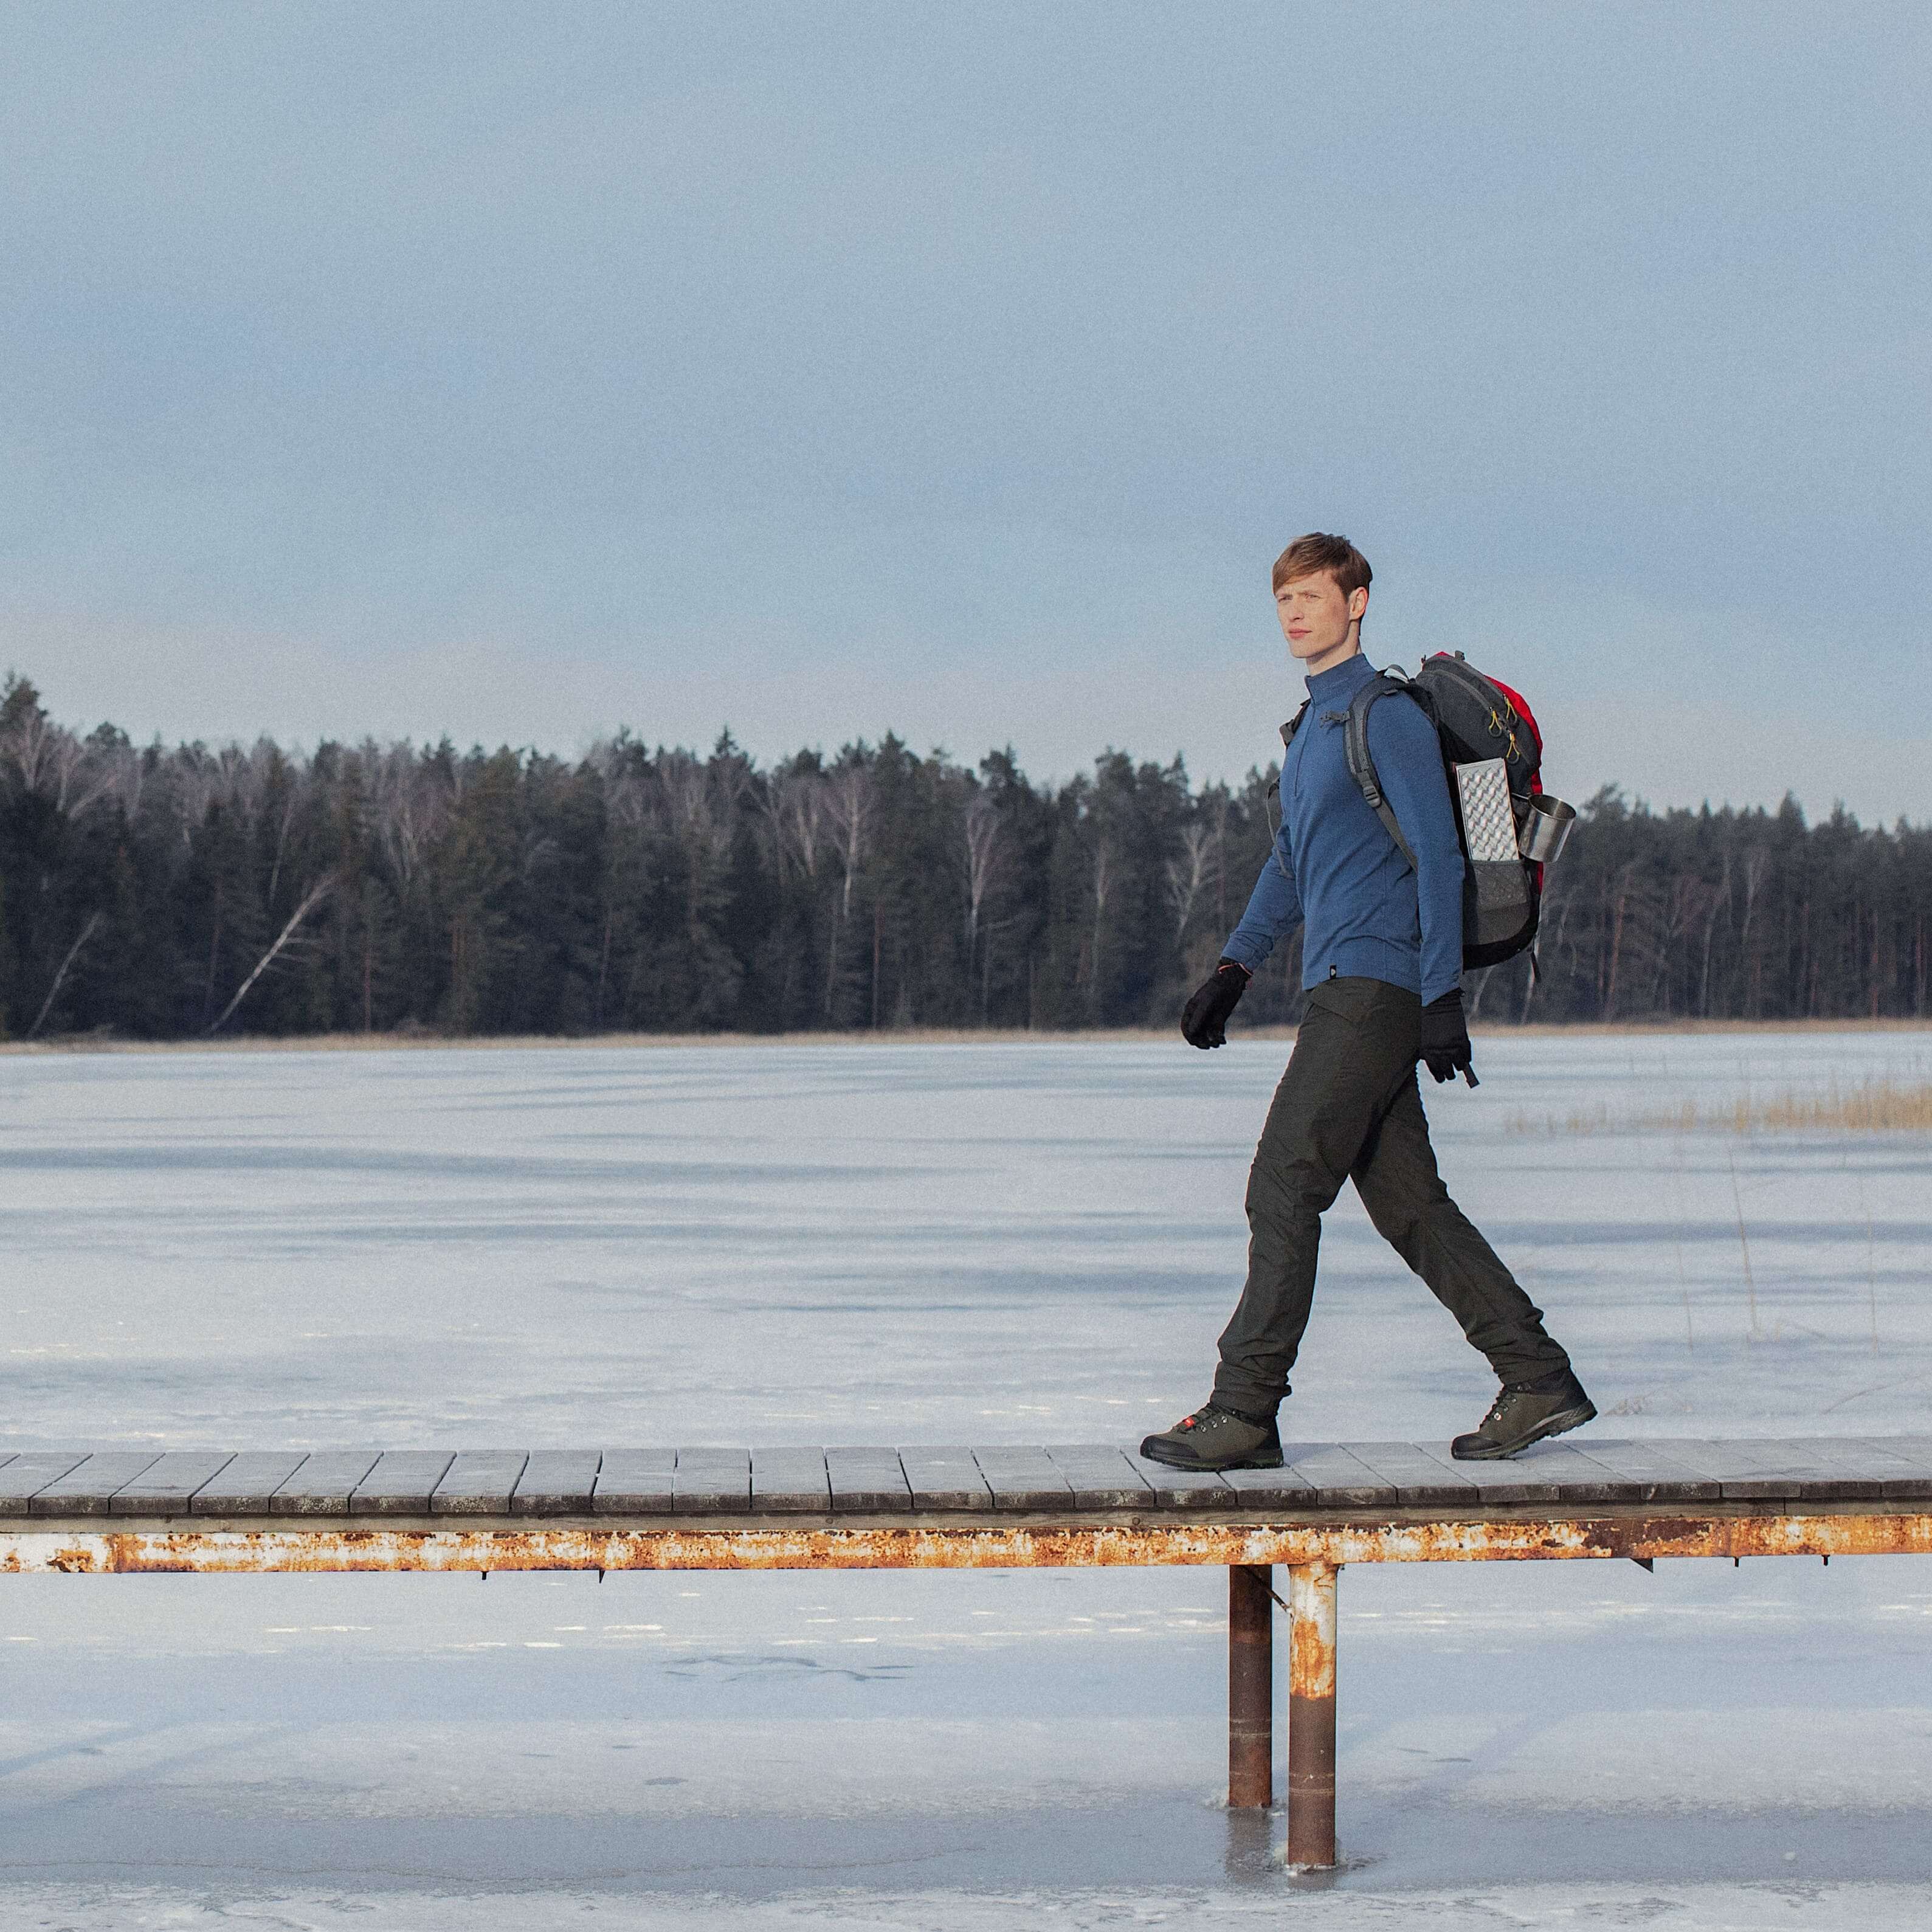 a-man-with-a-backpack-walks-on-a-bridge-over-a-frozen-lake-in-a-forest